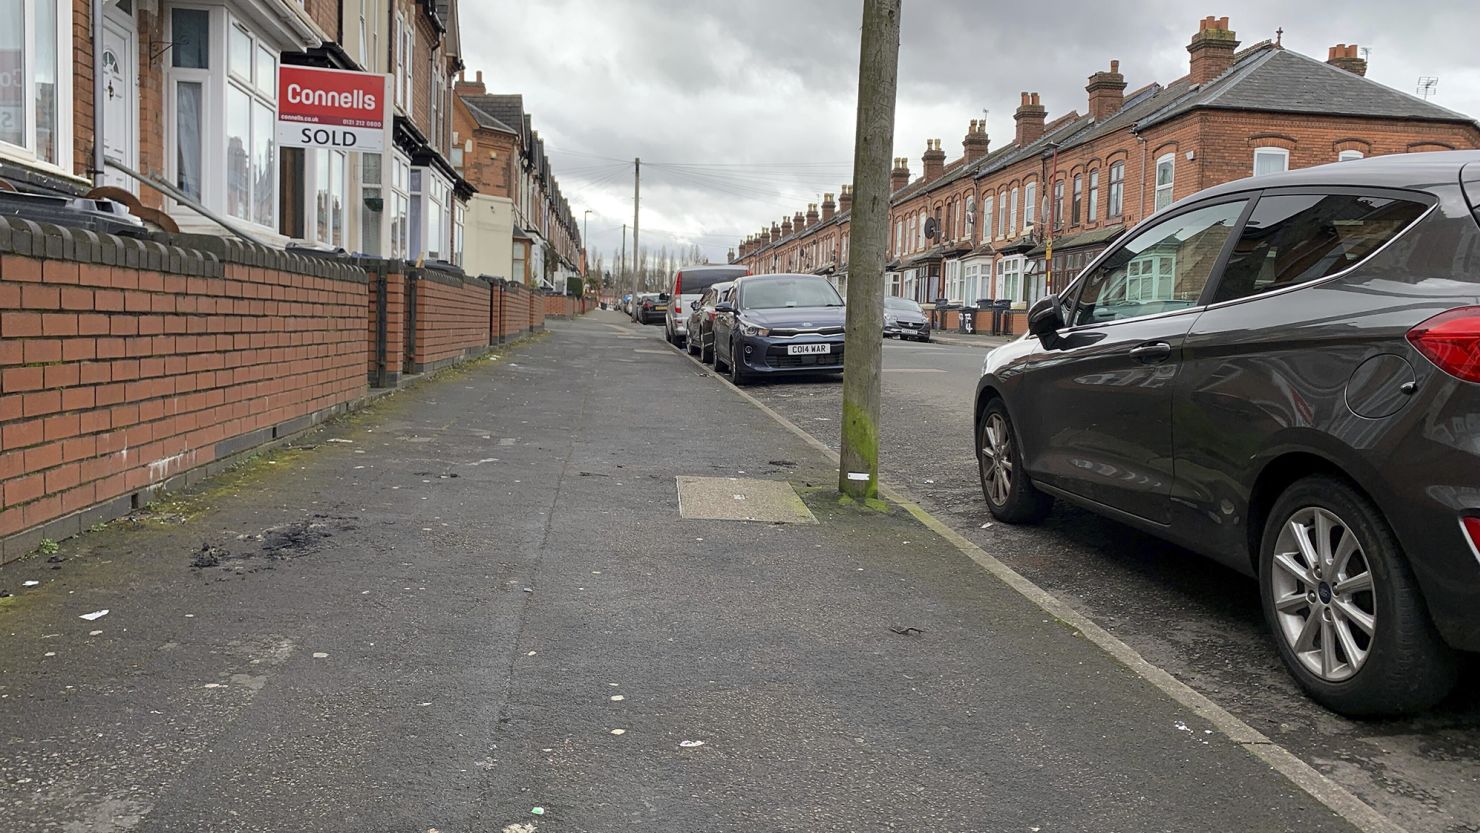 A man was charged for an attack in west London and another in Edgbaston, Birmingham (pictured above), where the second incident took place.